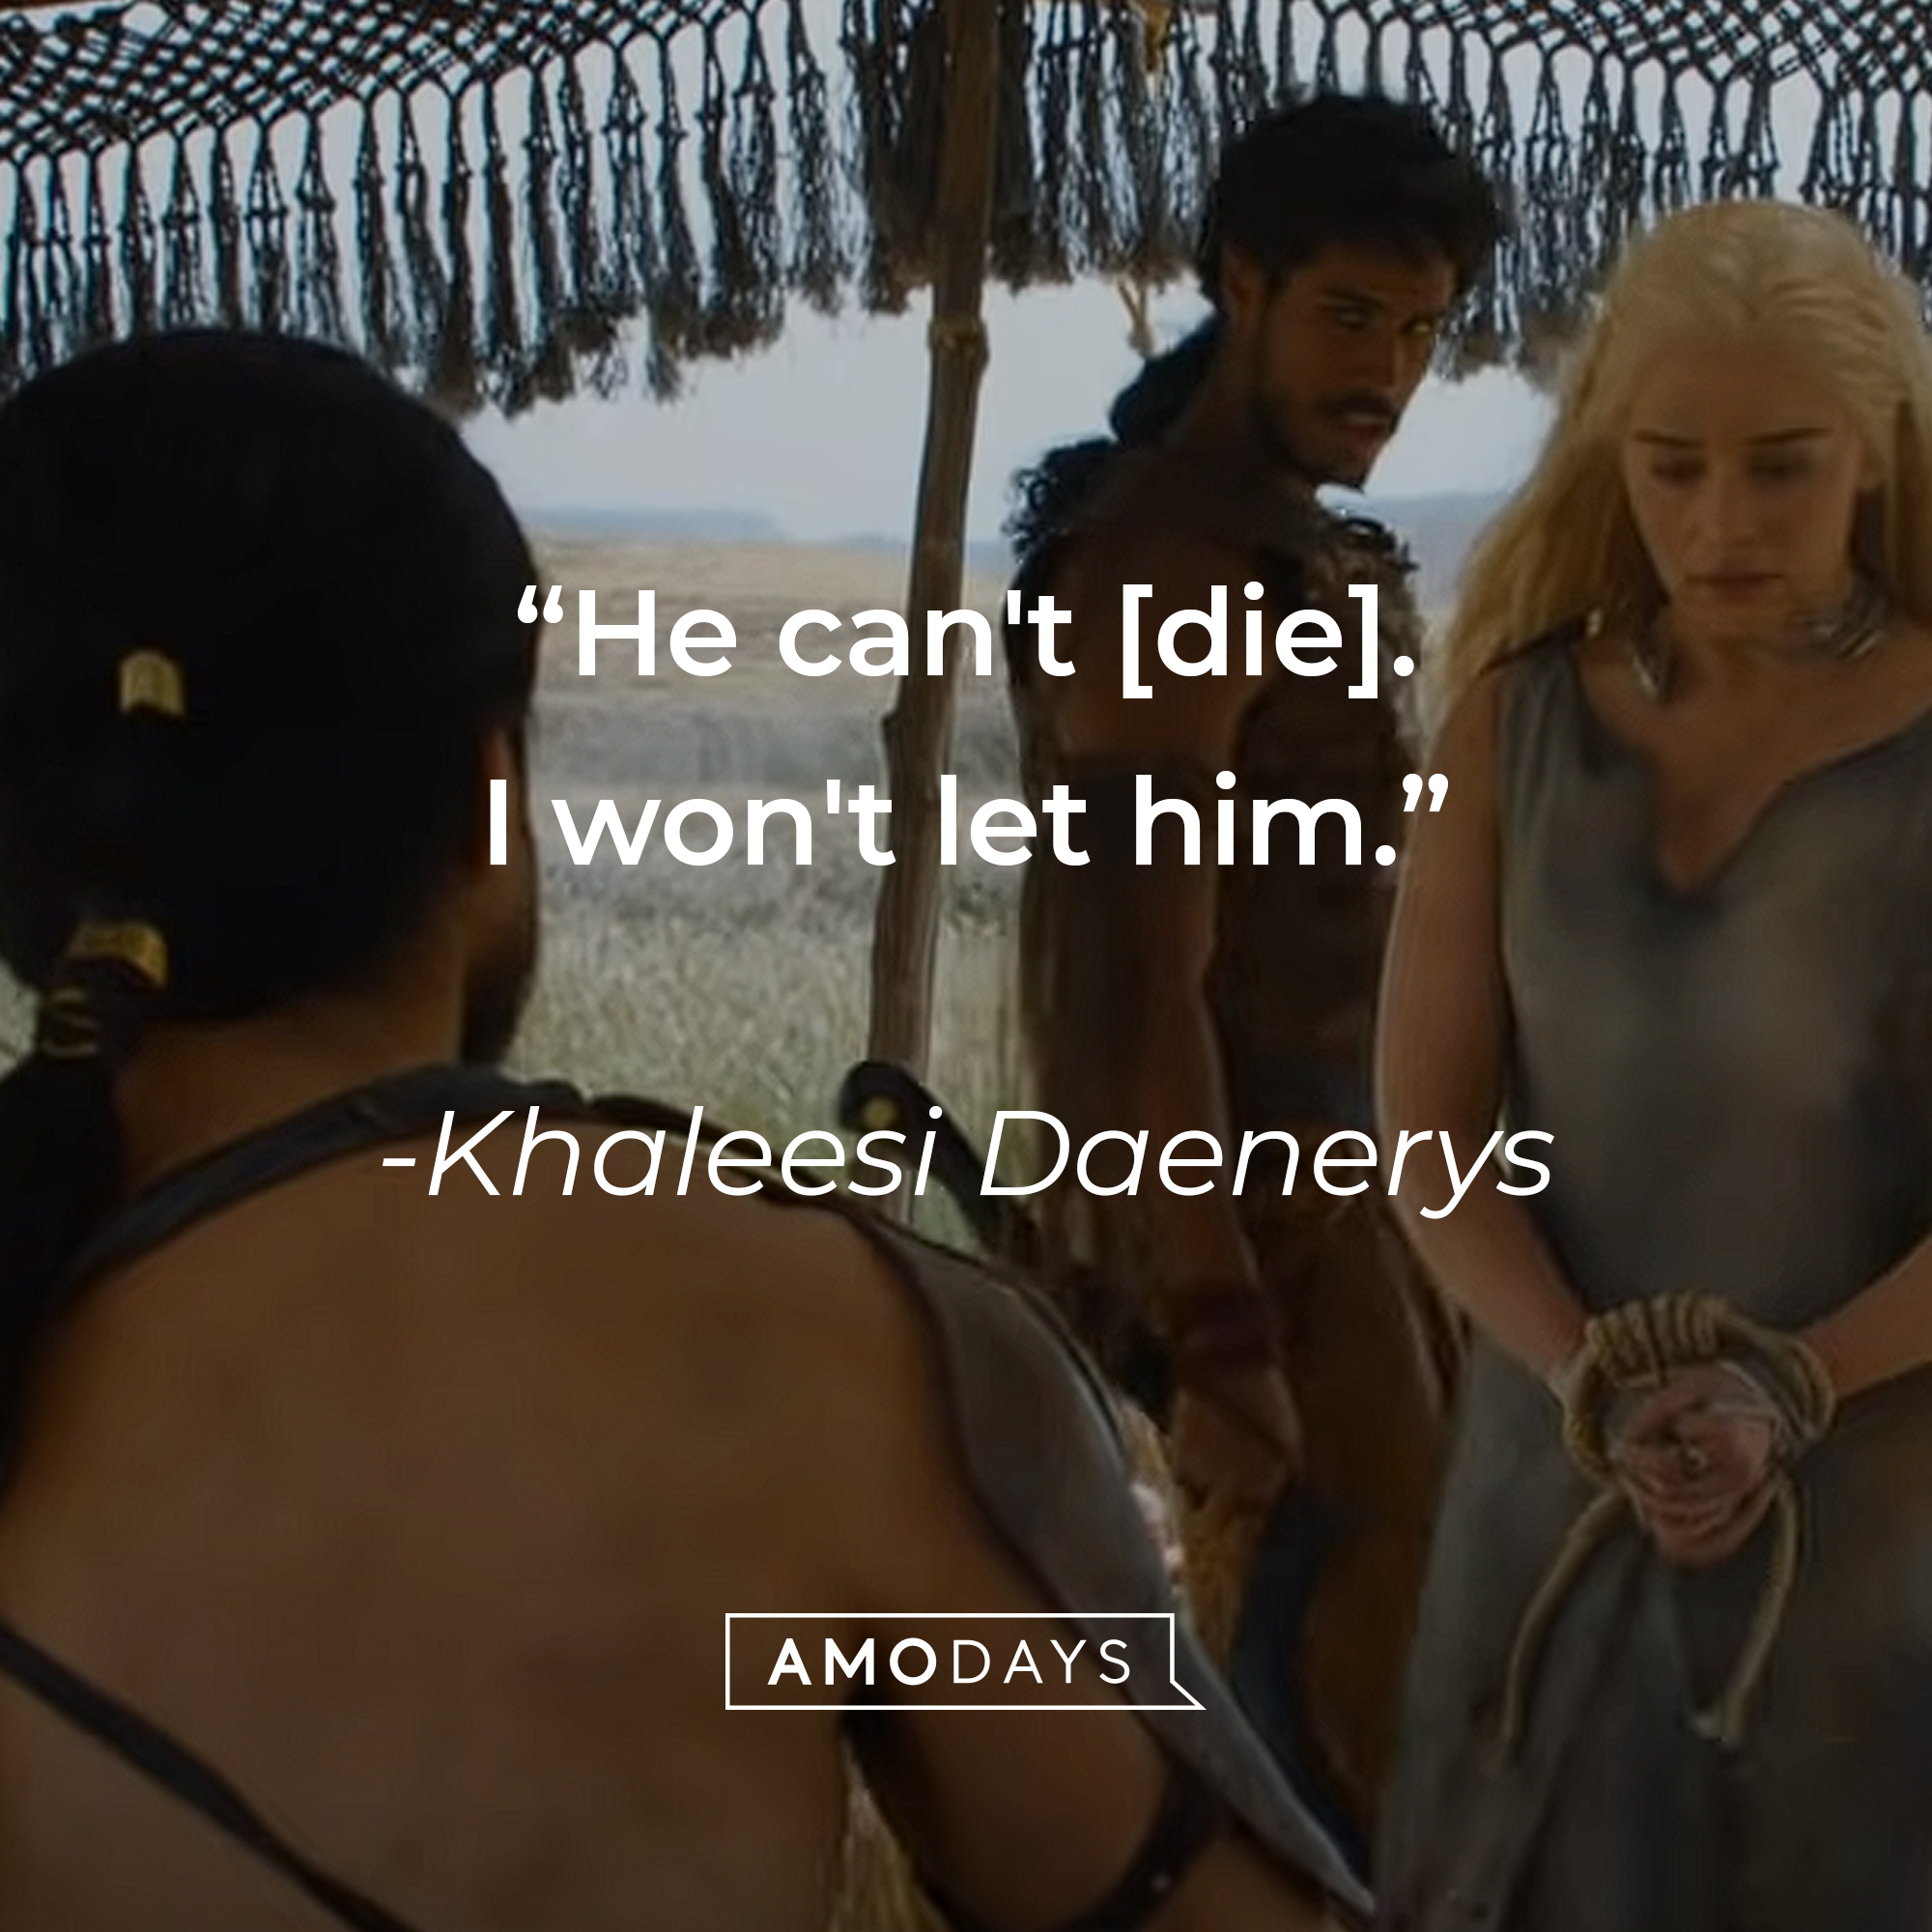 Khaleesi Daenerys' quote: "He can't [die]. I won't let him." | Source: youtube.com/gameofthrones